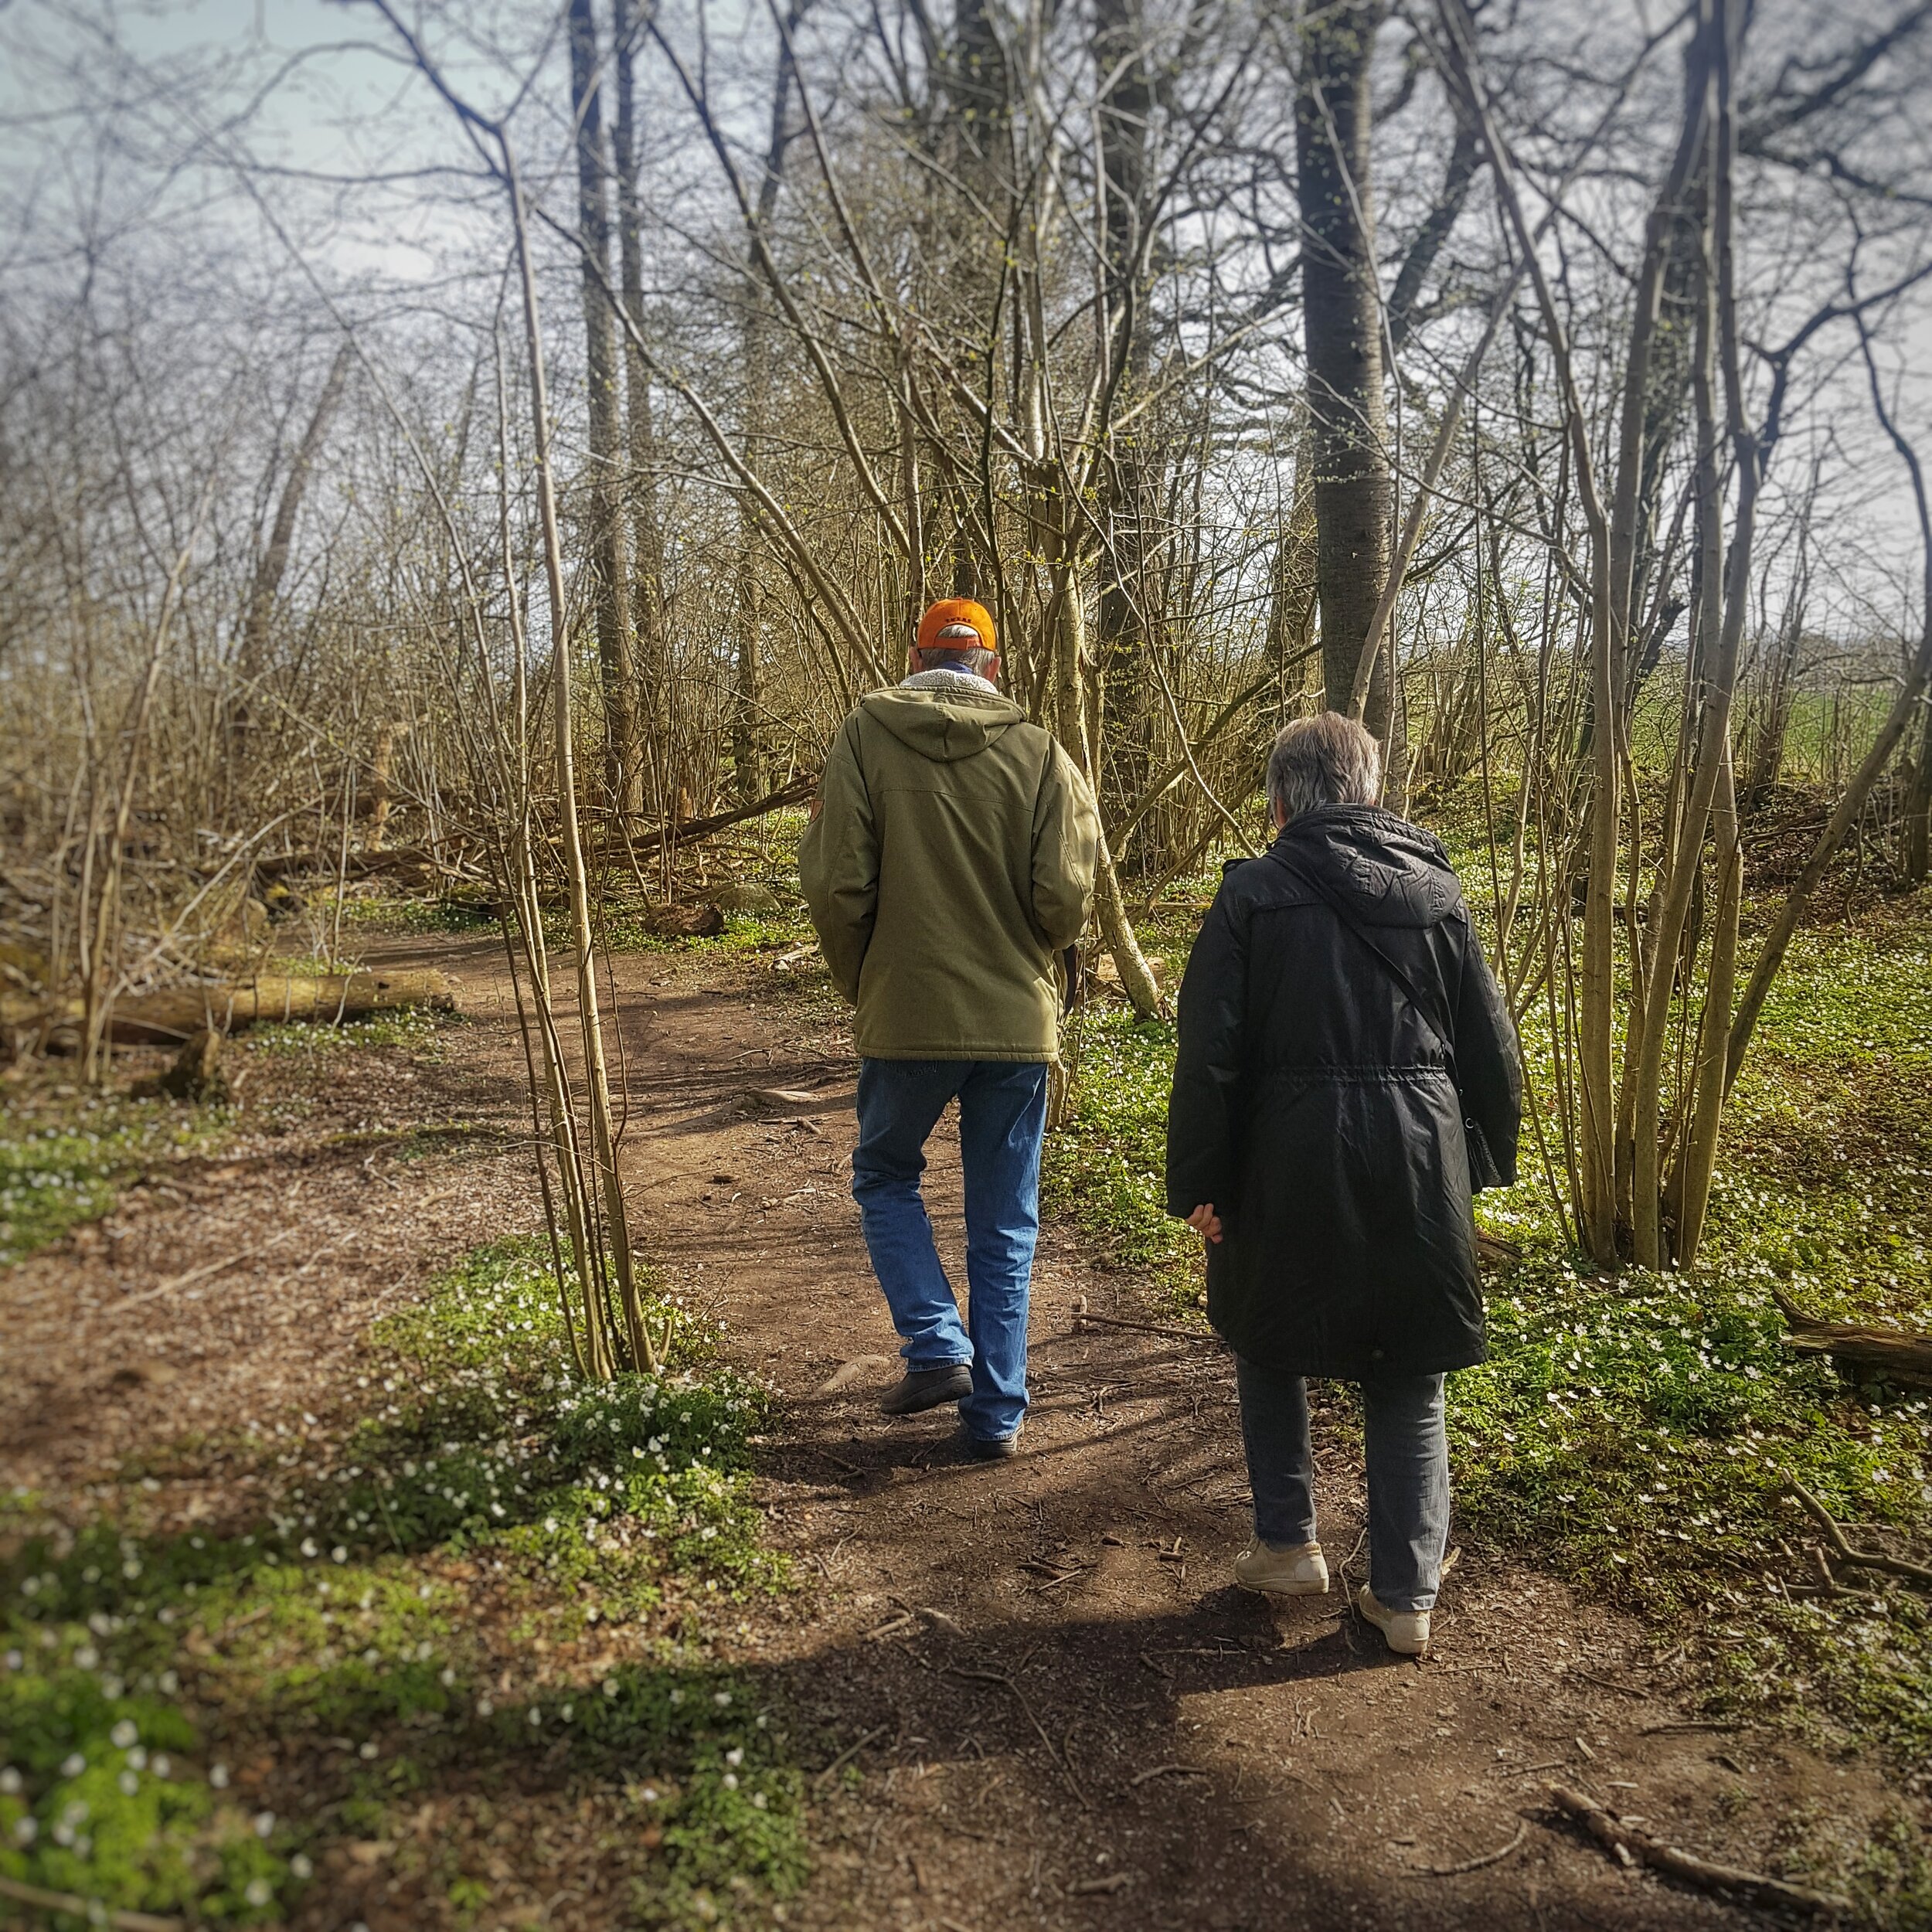 Day 101 - April 10: Social distancing in the woods